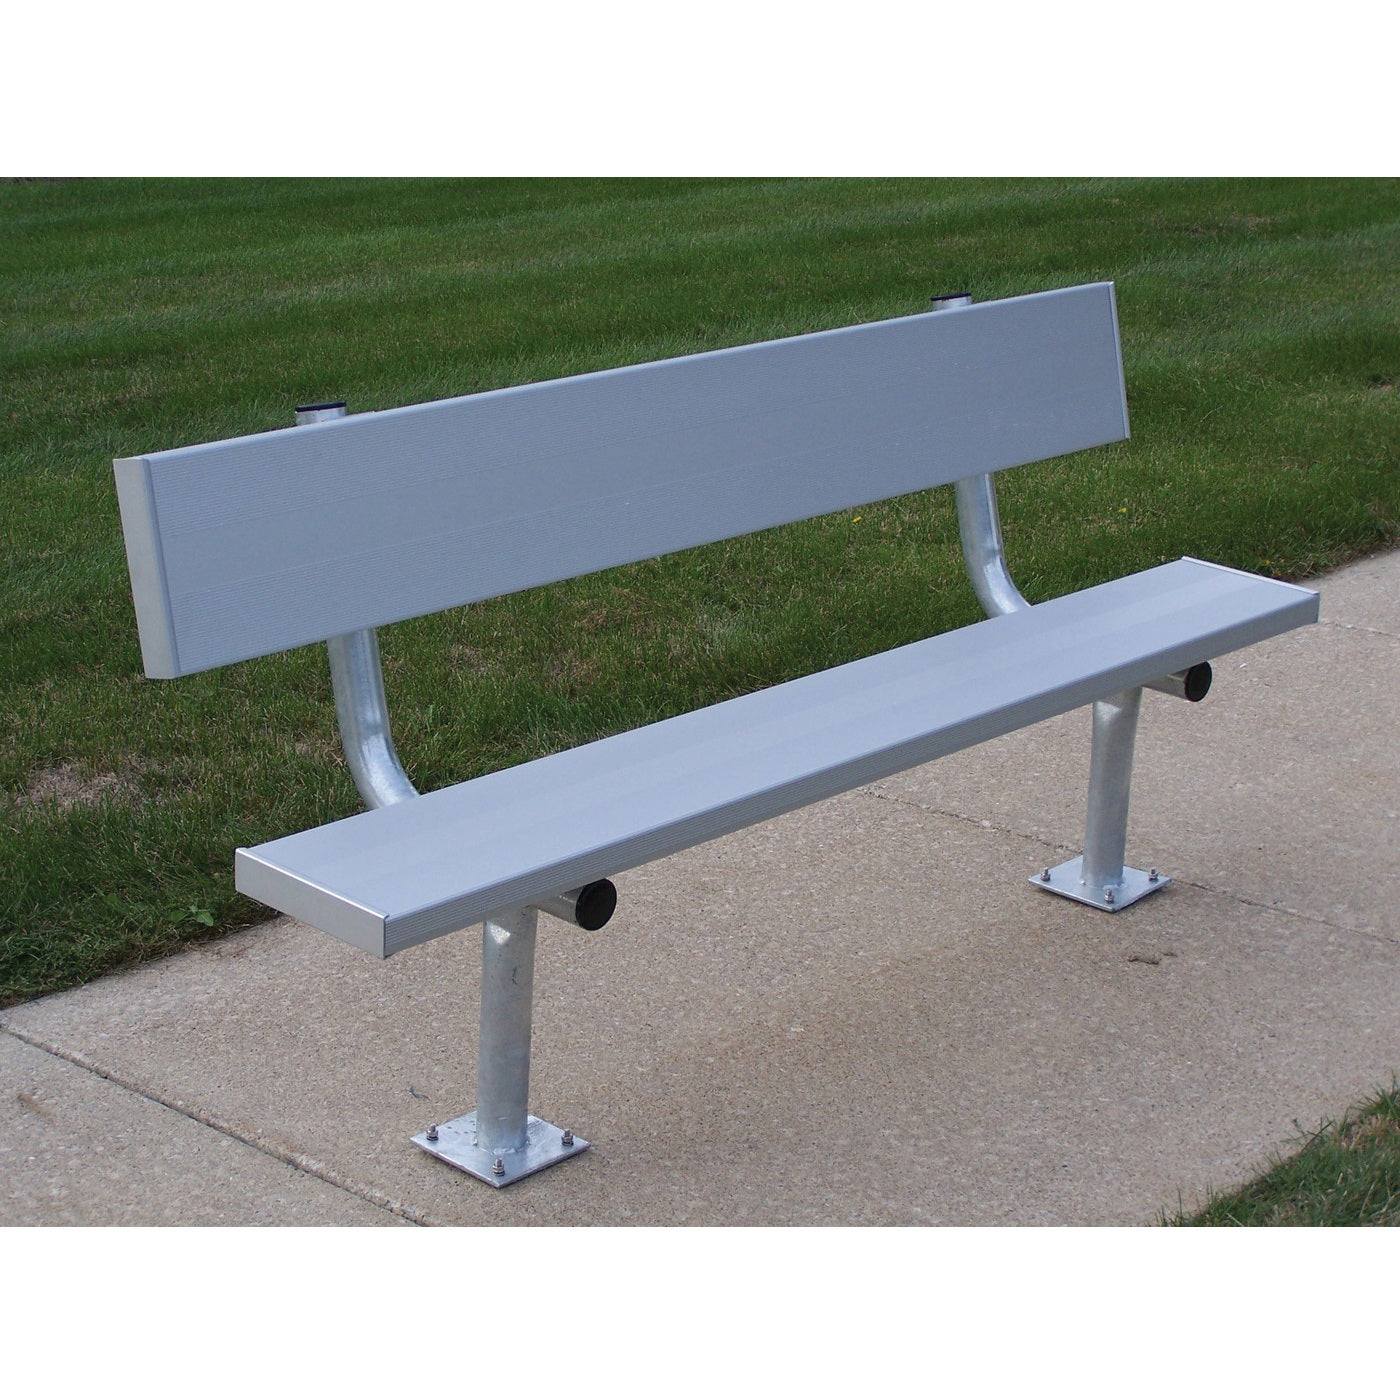 trigon sports 21 surface mount team bench with back